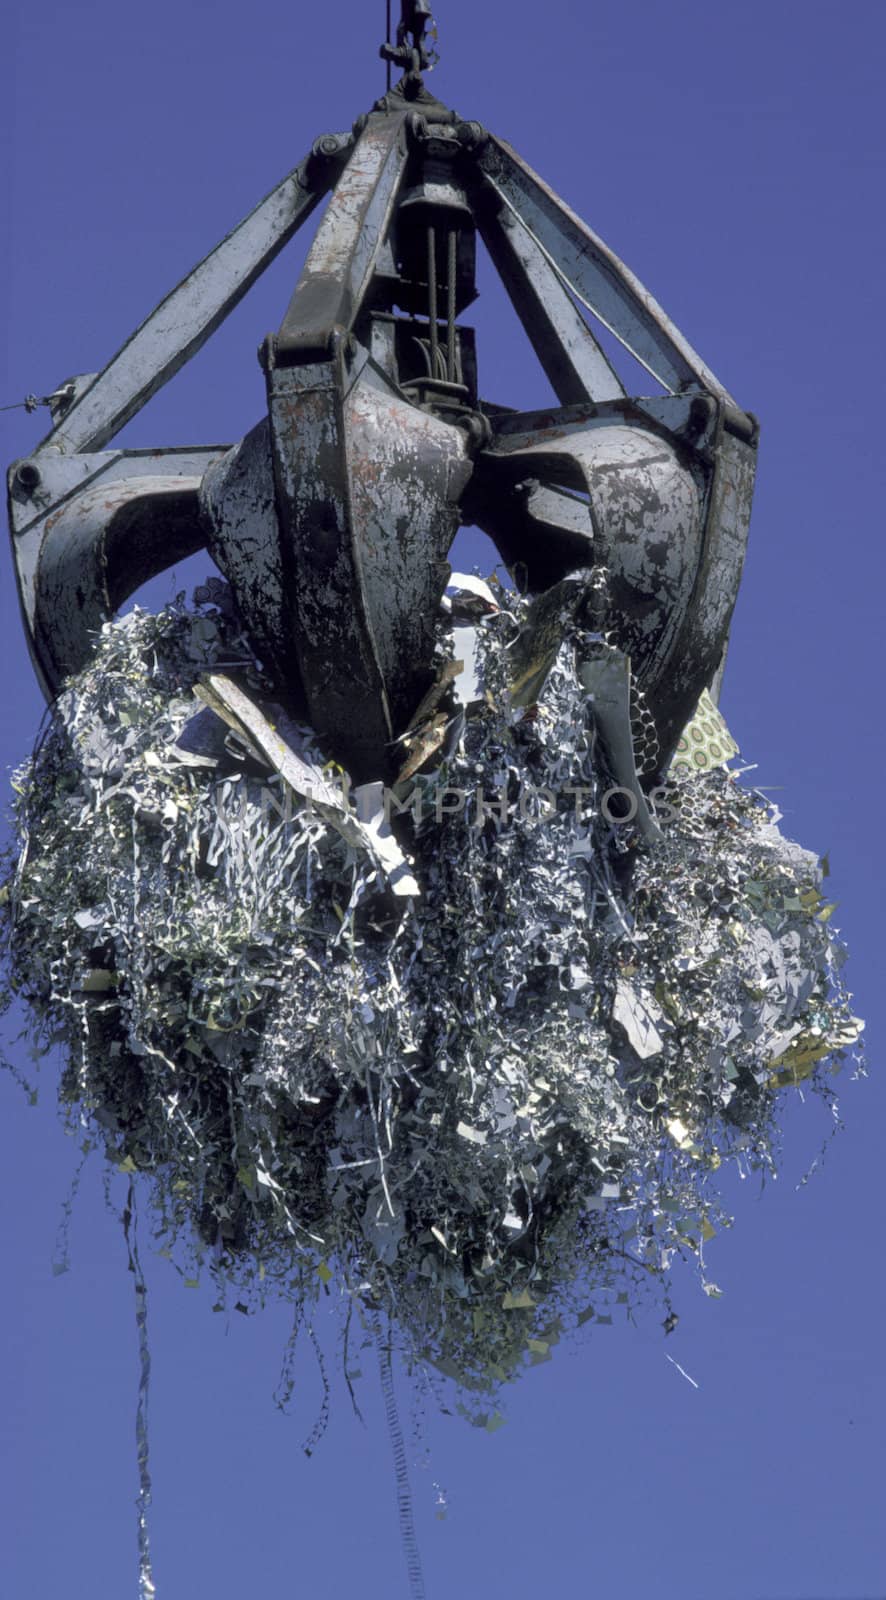 crane lifting metal pieces for recycling